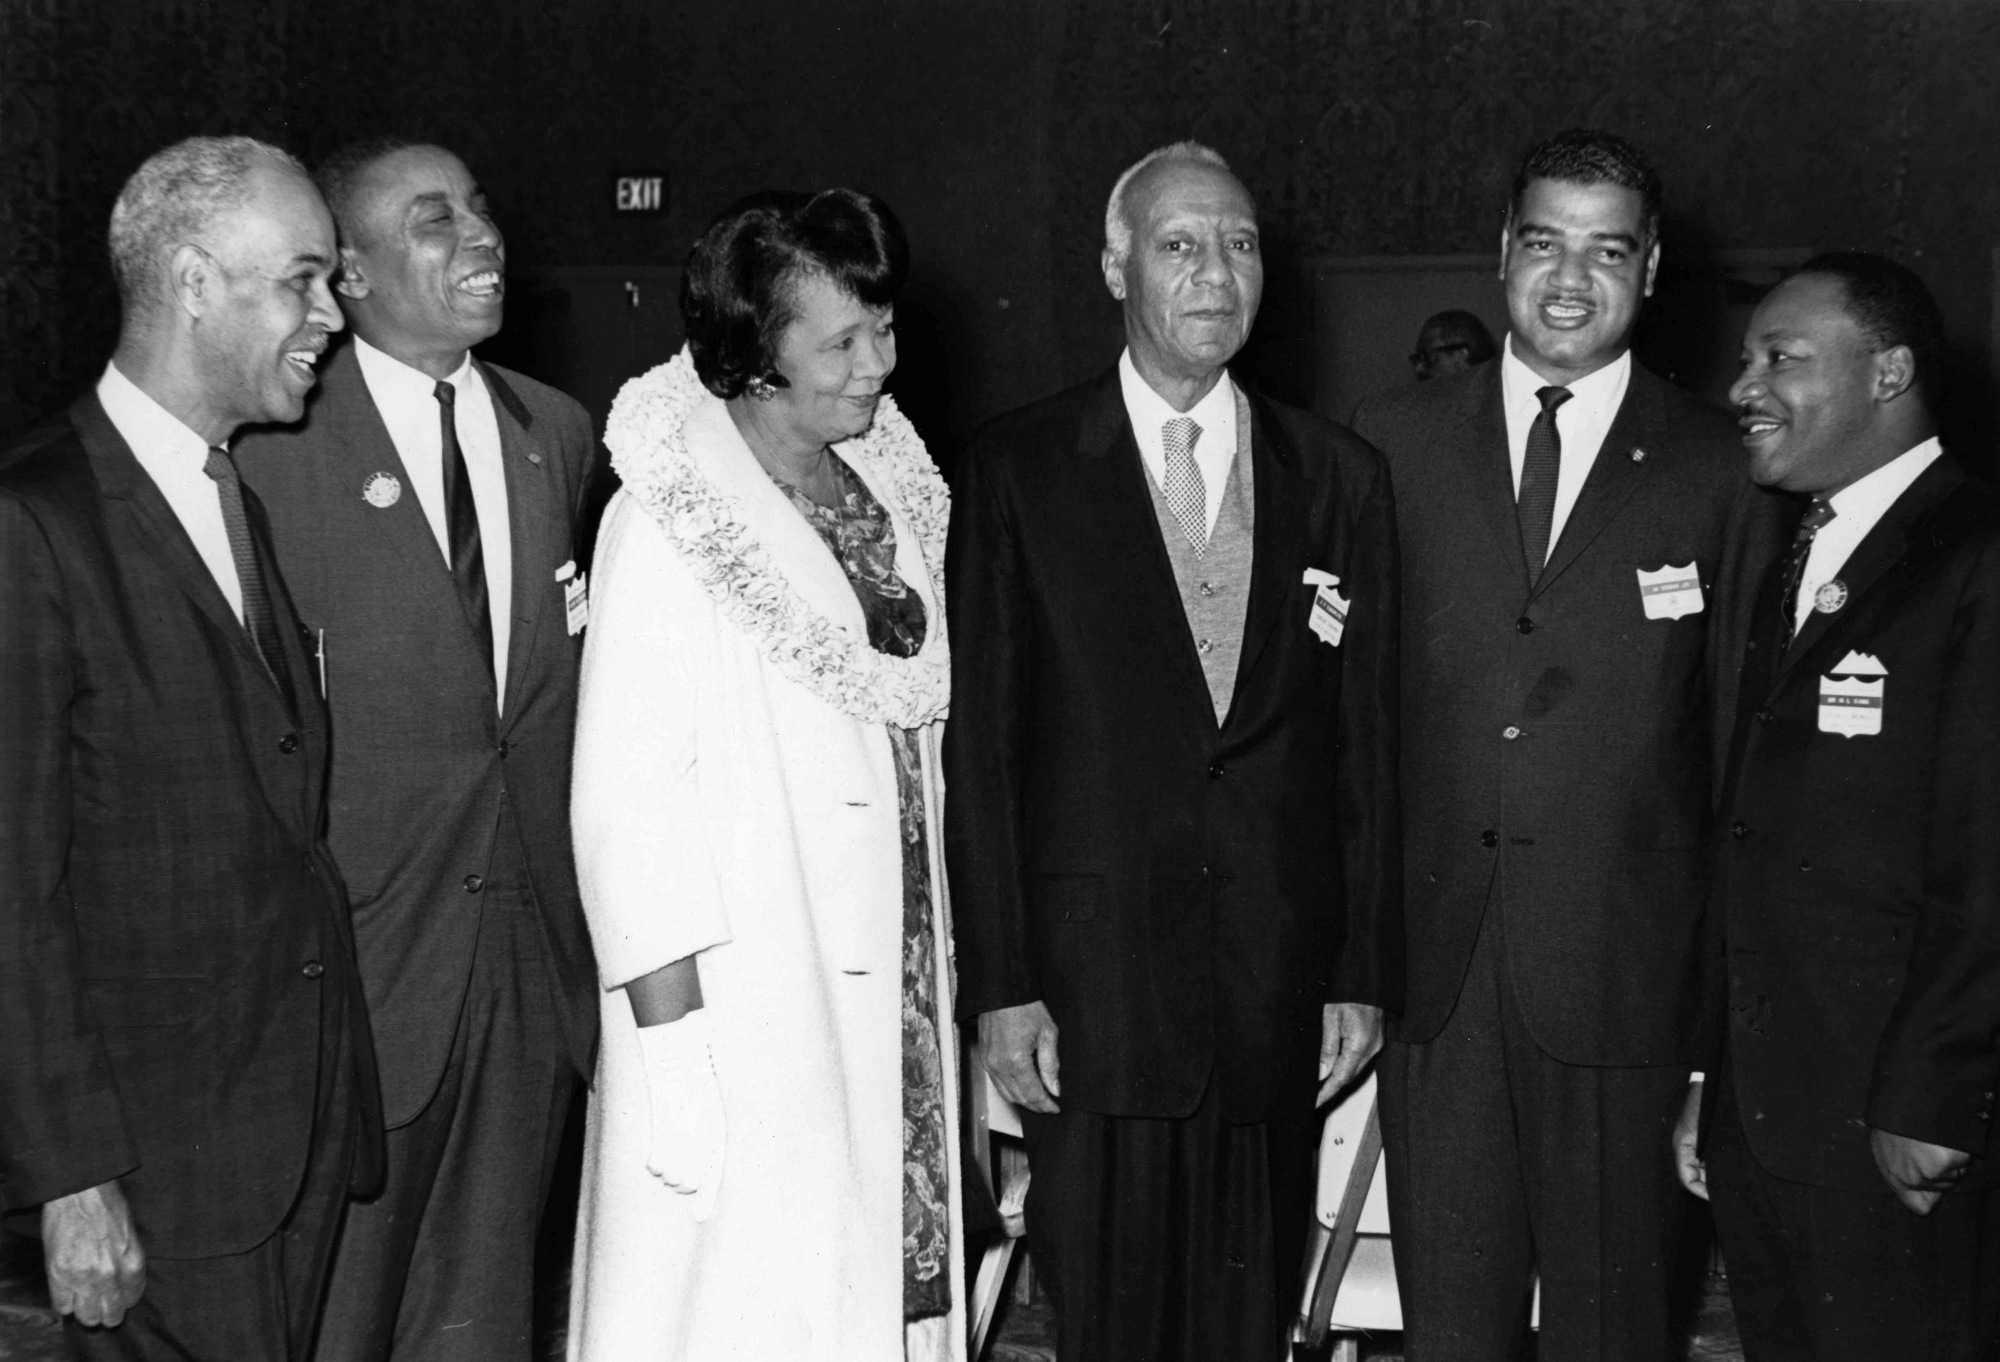 Photograph of Dorothy Height with other civil rights leaders: Roy Wilkins, Floyd McKissick, A. Philip Randolph, Whitney Young, and Rev. Martin Luther King Jr., ca. 1963